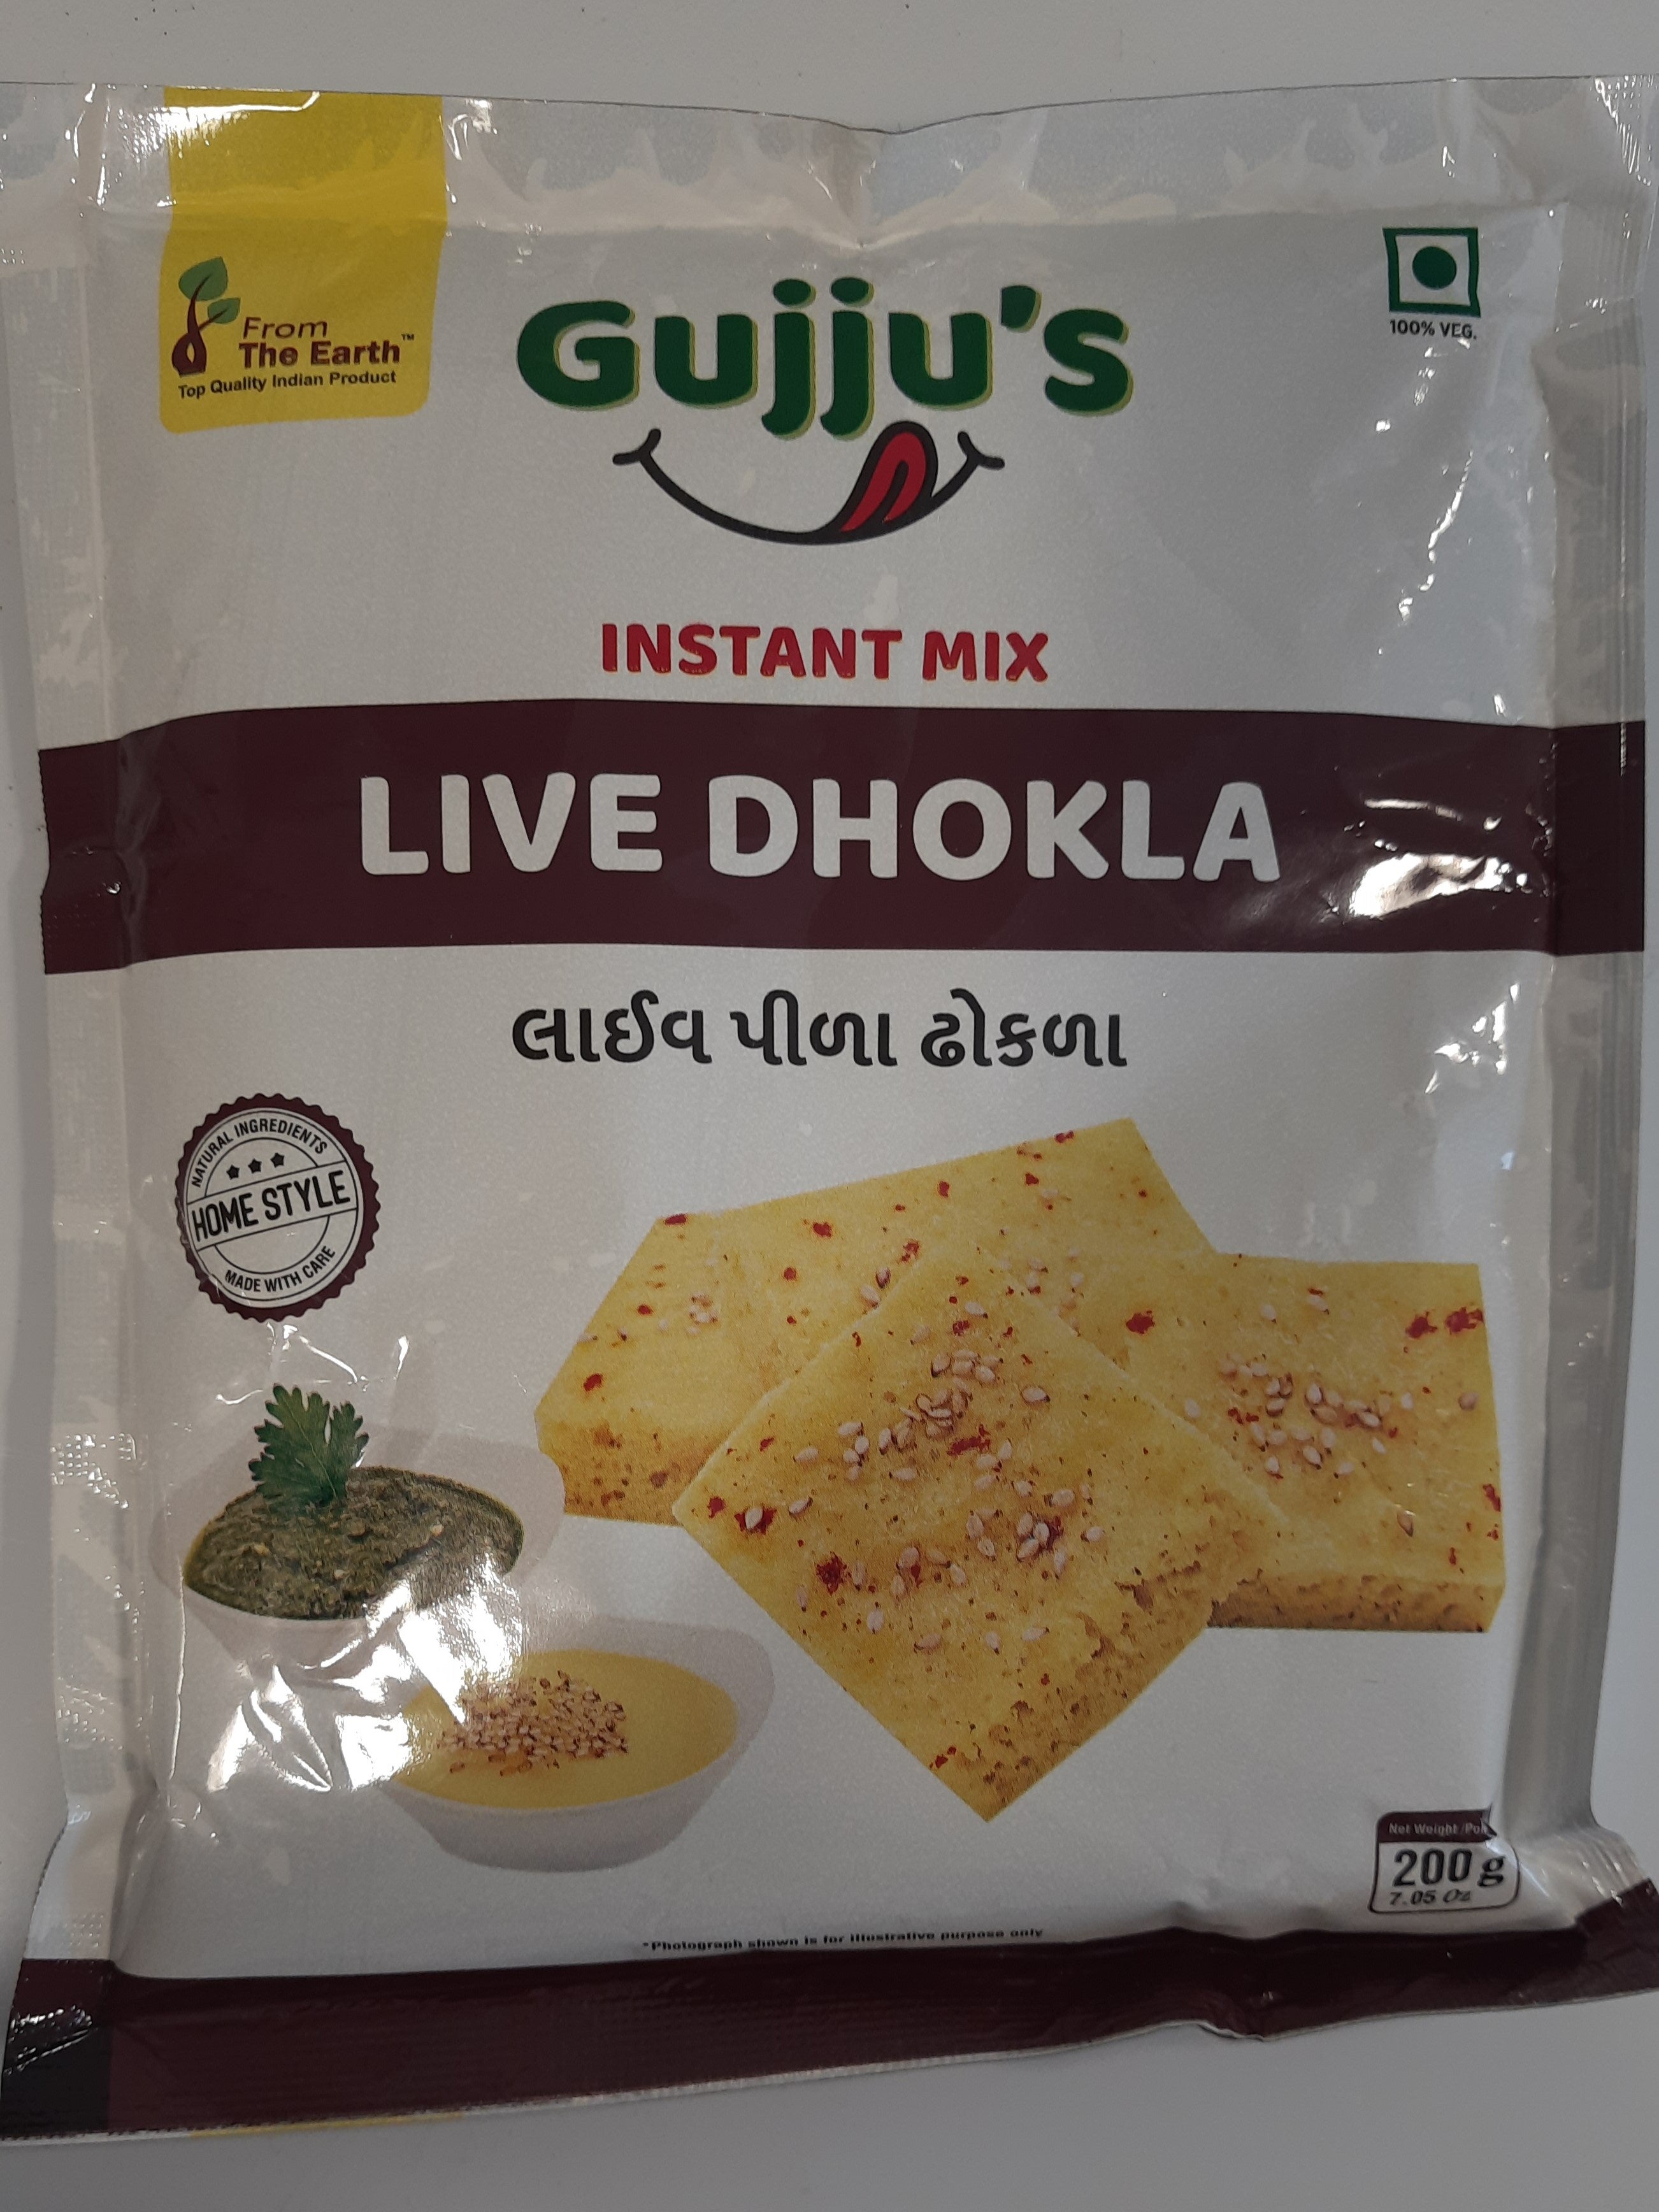 From the Earth - Live Dhokla 200g